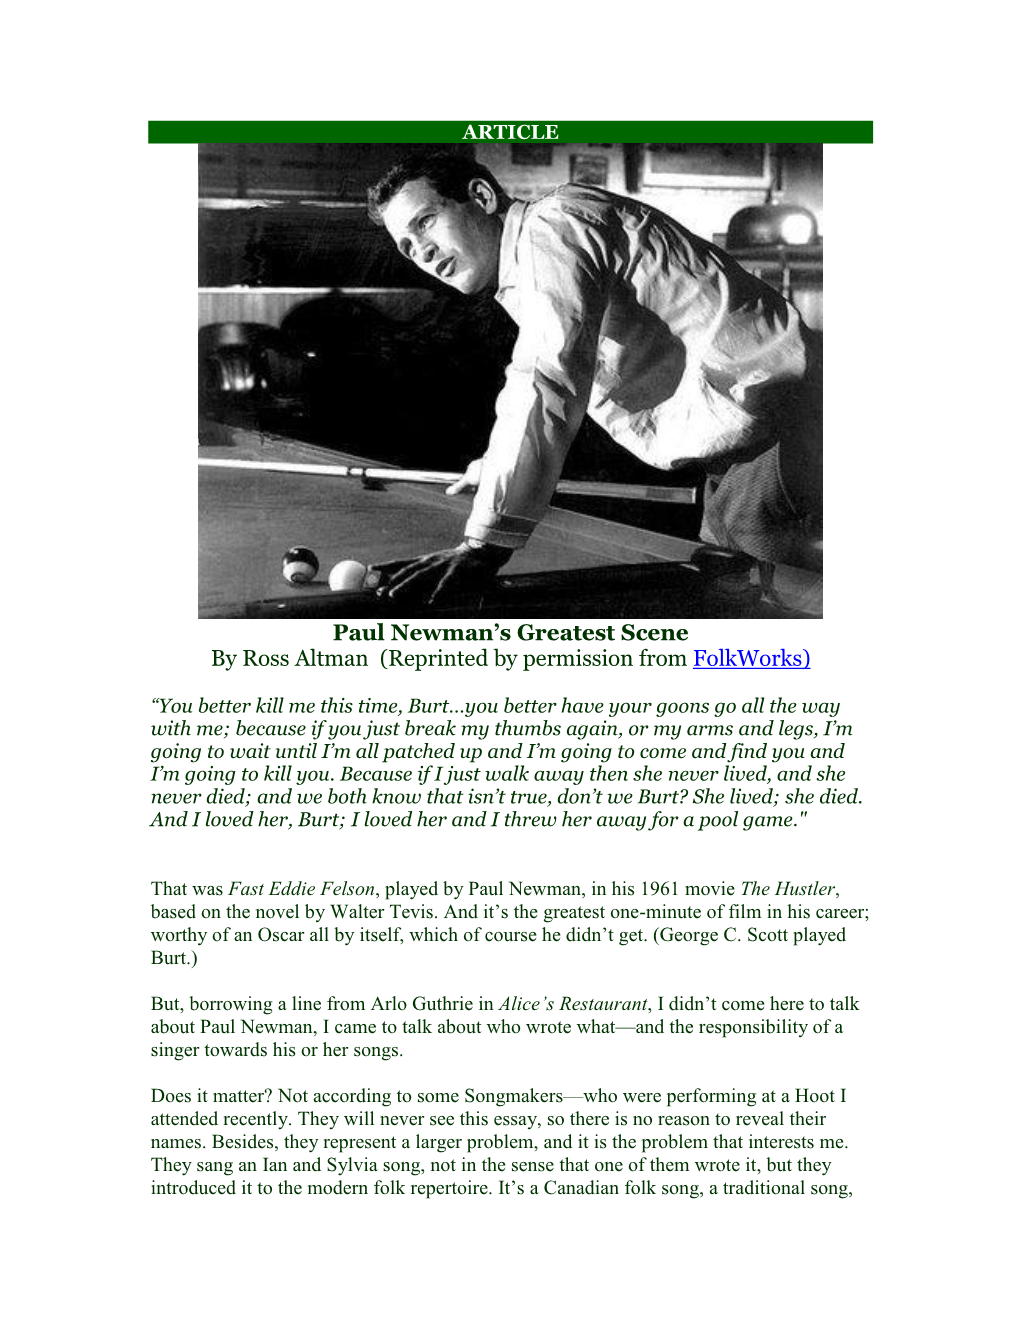 Paul Newman's Greatest Scene by Ross Altman (Reprinted By